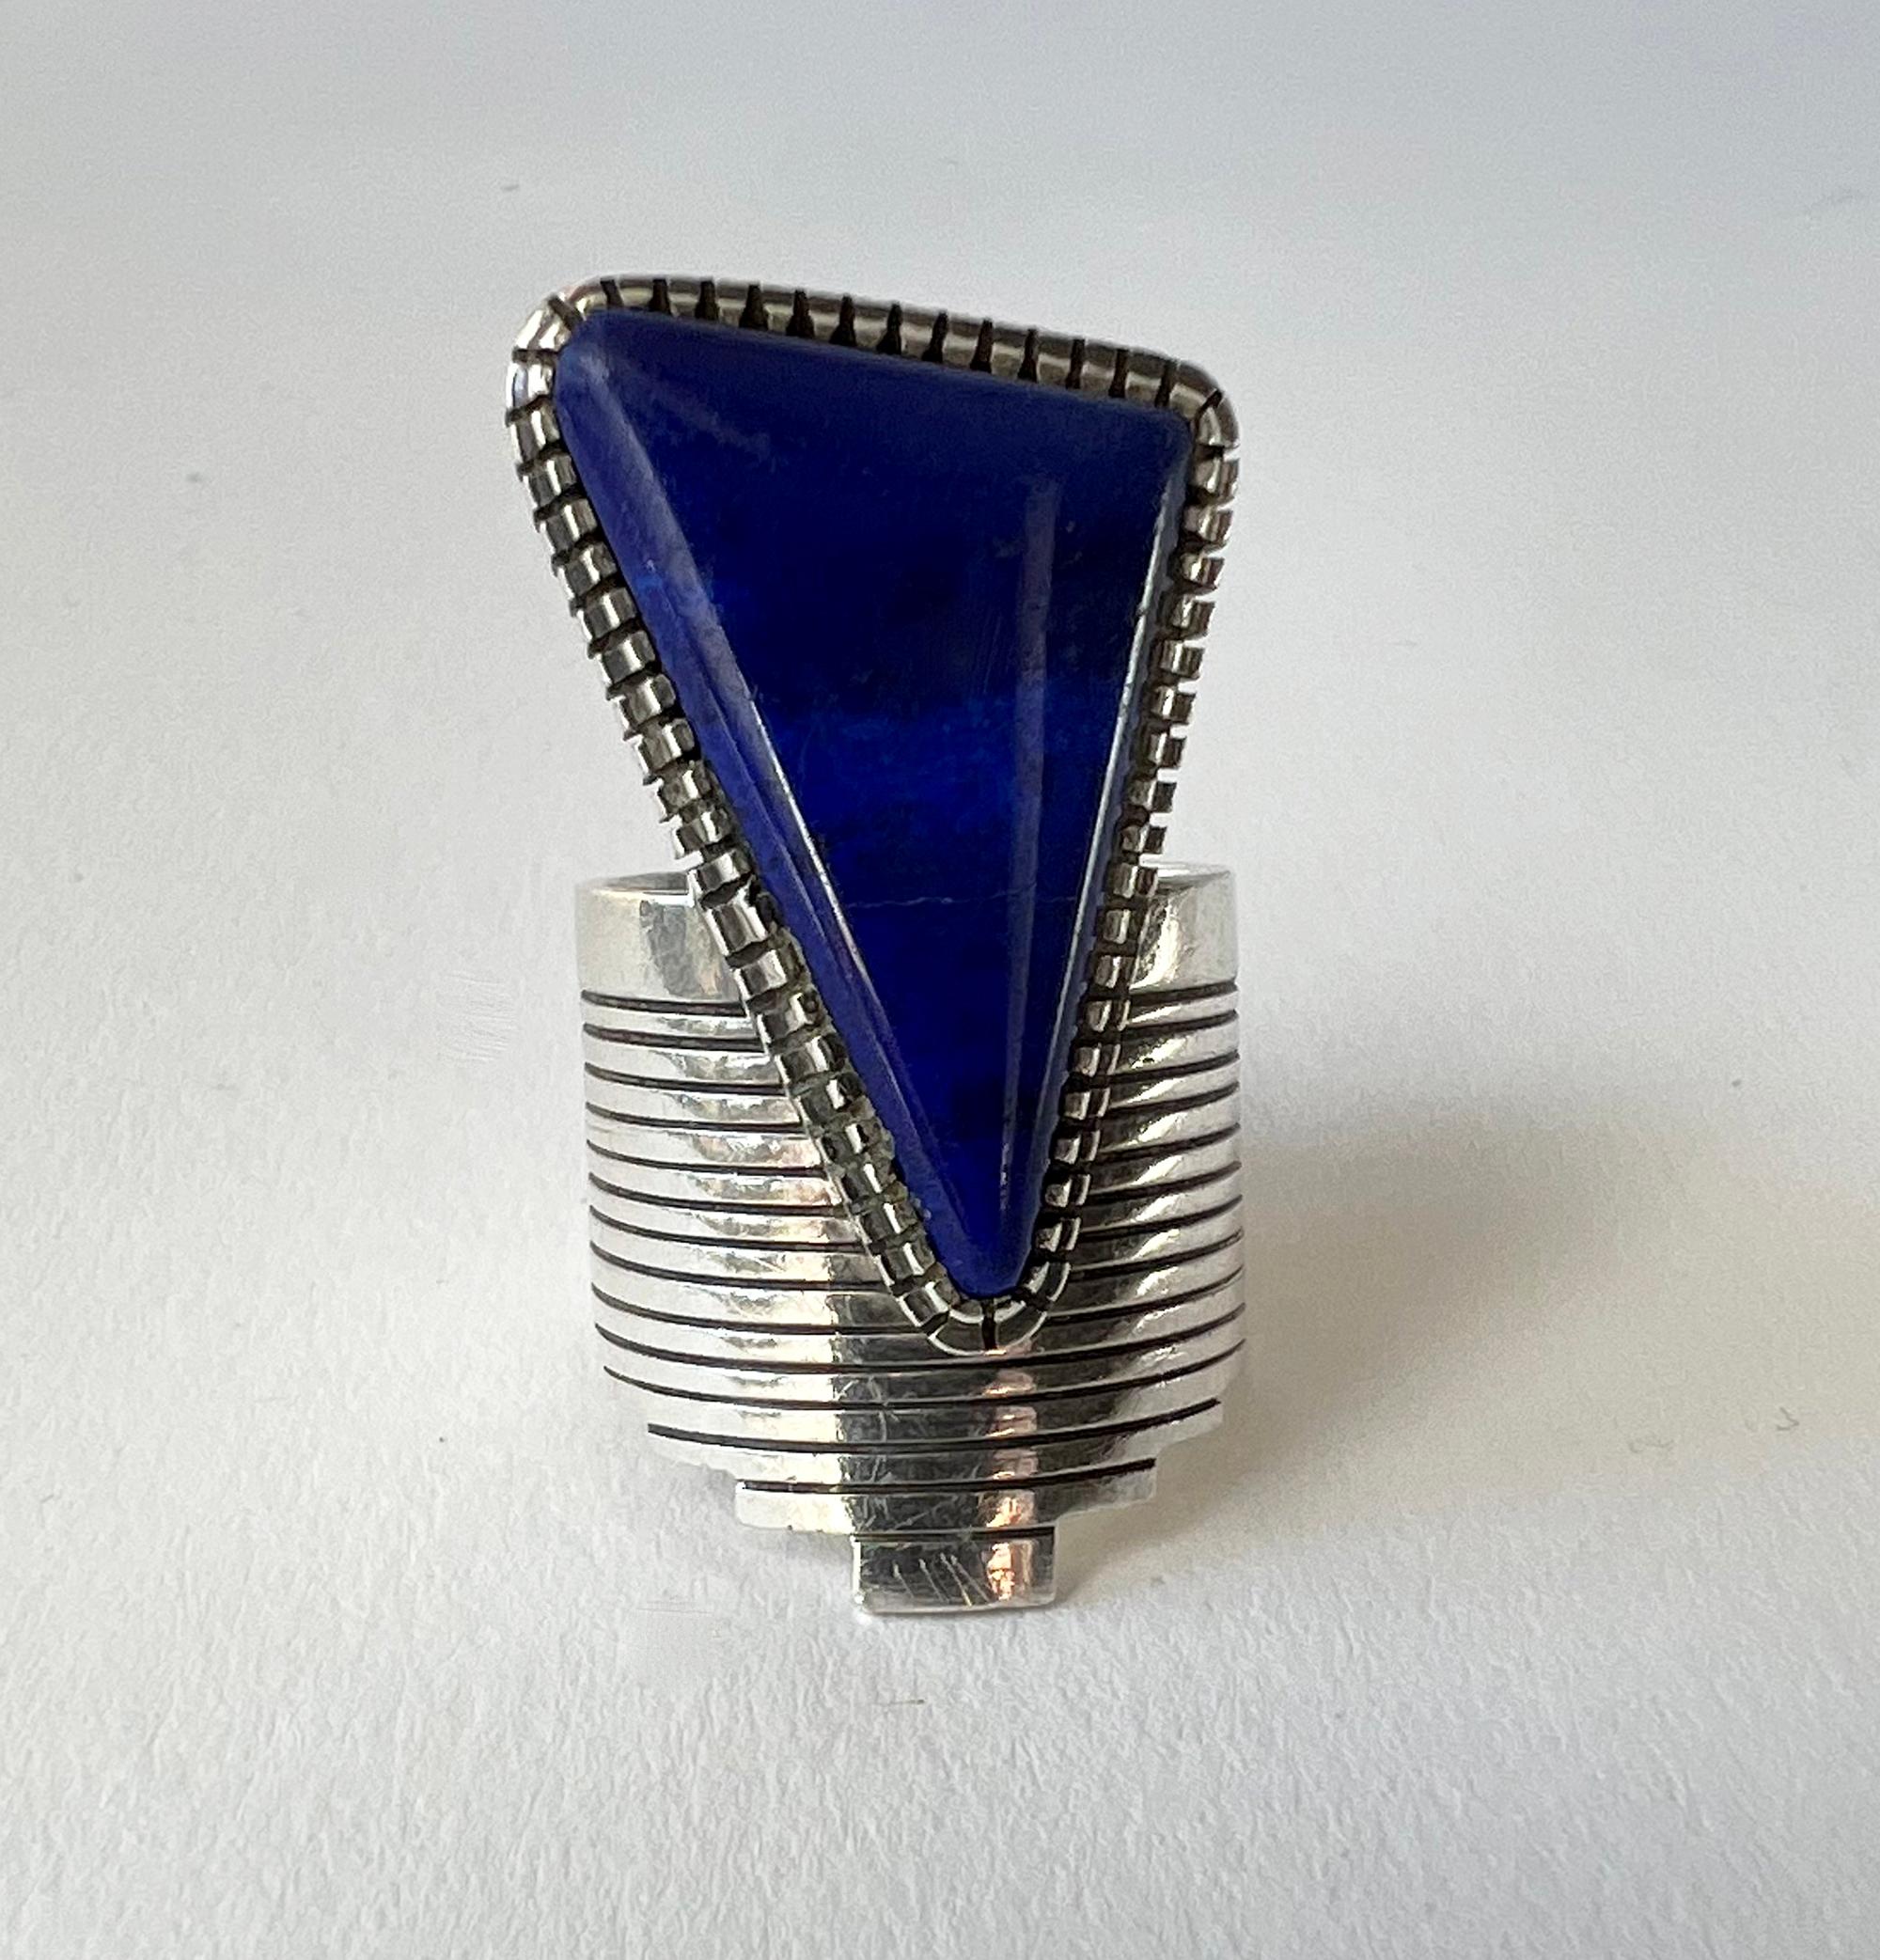 Large scale sterling silver and lapis lazuli ring created by Gibson Nez of New Mexico.  Ring is a finger size 8.75, but because of the width of the shank it will fit a bit smaller.  It is signed with the artists hallmark of GZN and in very good